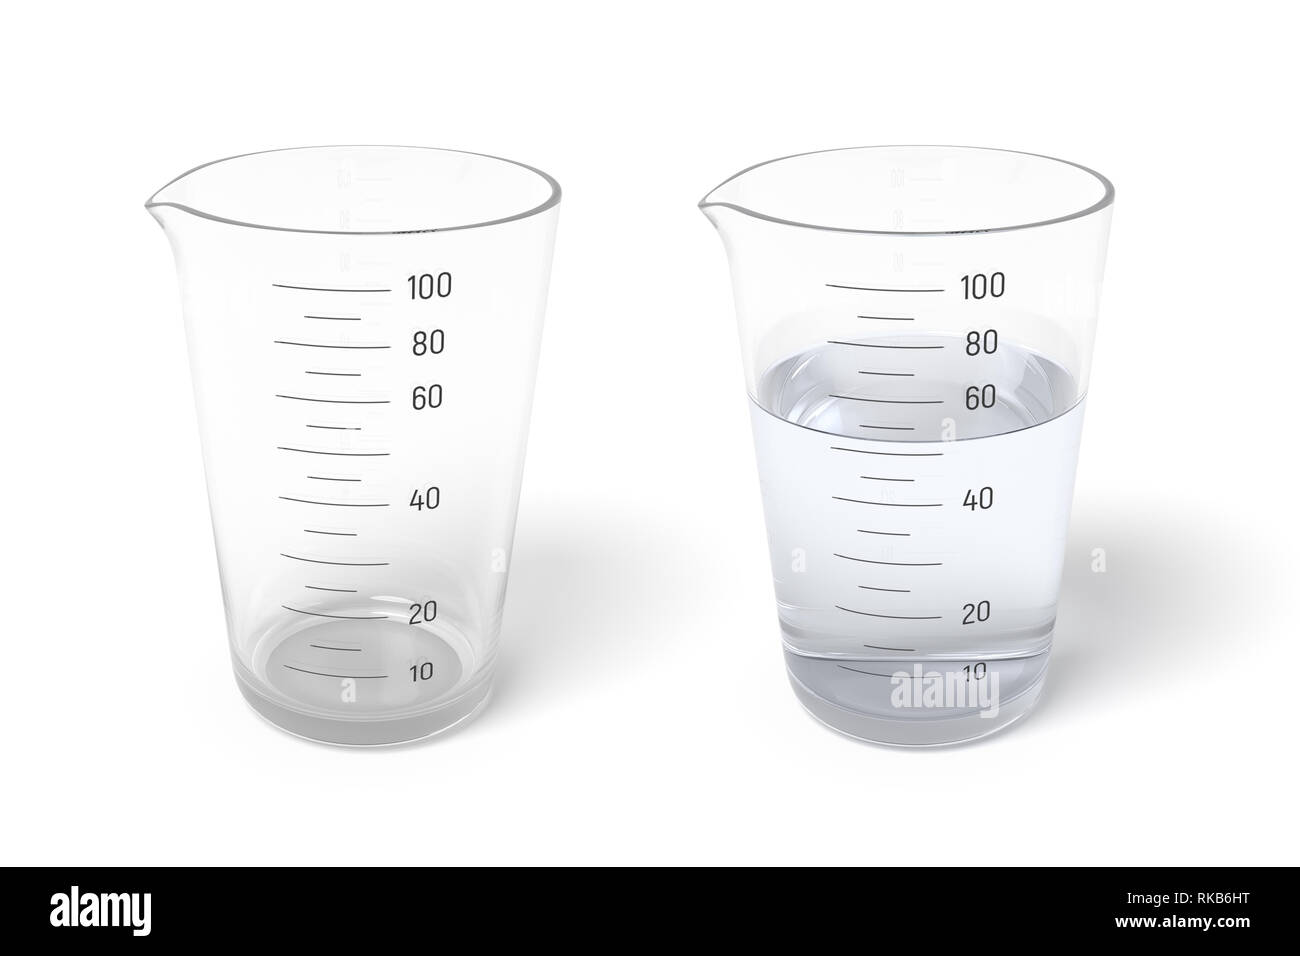 https://c8.alamy.com/comp/RKB6HT/3d-rendering-of-two-measuring-cups-one-half-filled-with-transparent-liquid-isolated-on-white-background-RKB6HT.jpg